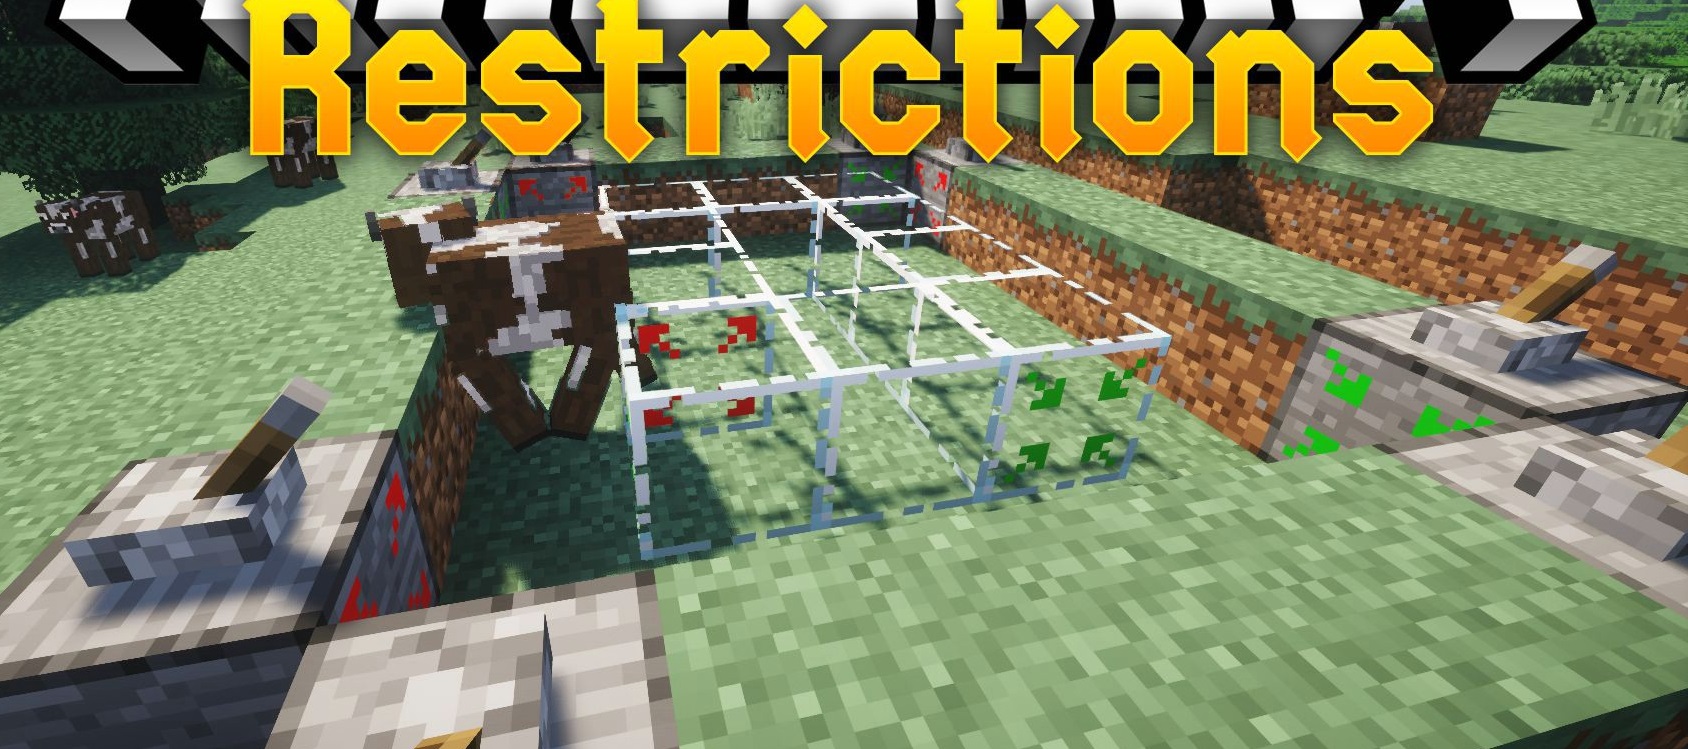 Restrictions-mod-for-minecraft-logo